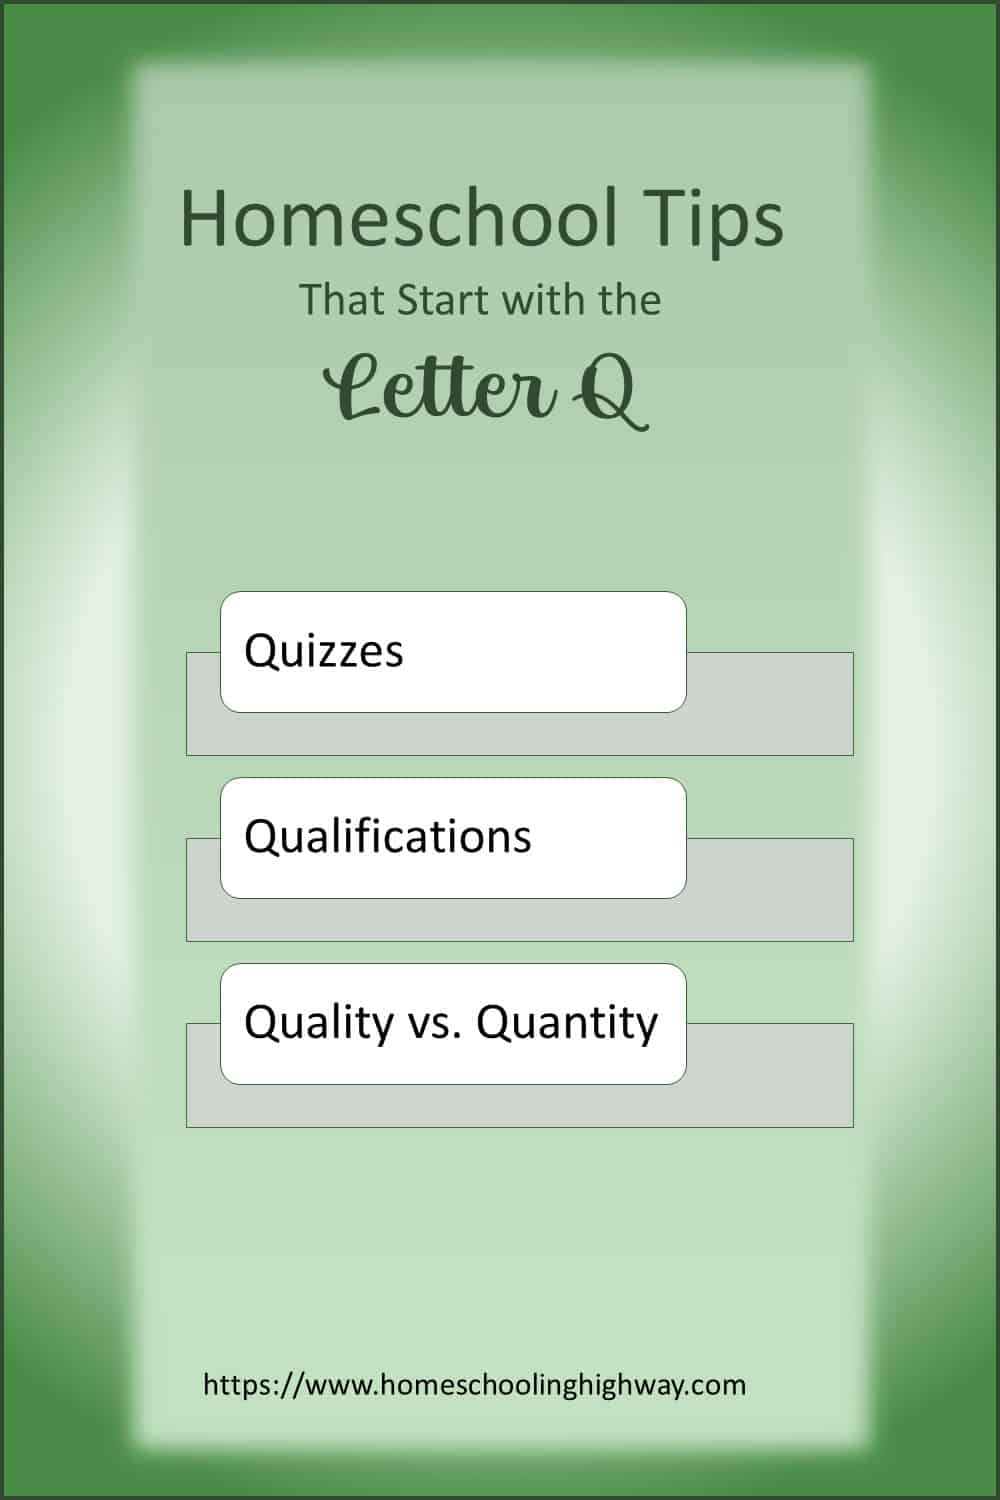 Homeschooling Tips That Start With Q. Quizzes, Qualifications, Quality vs. Quantity